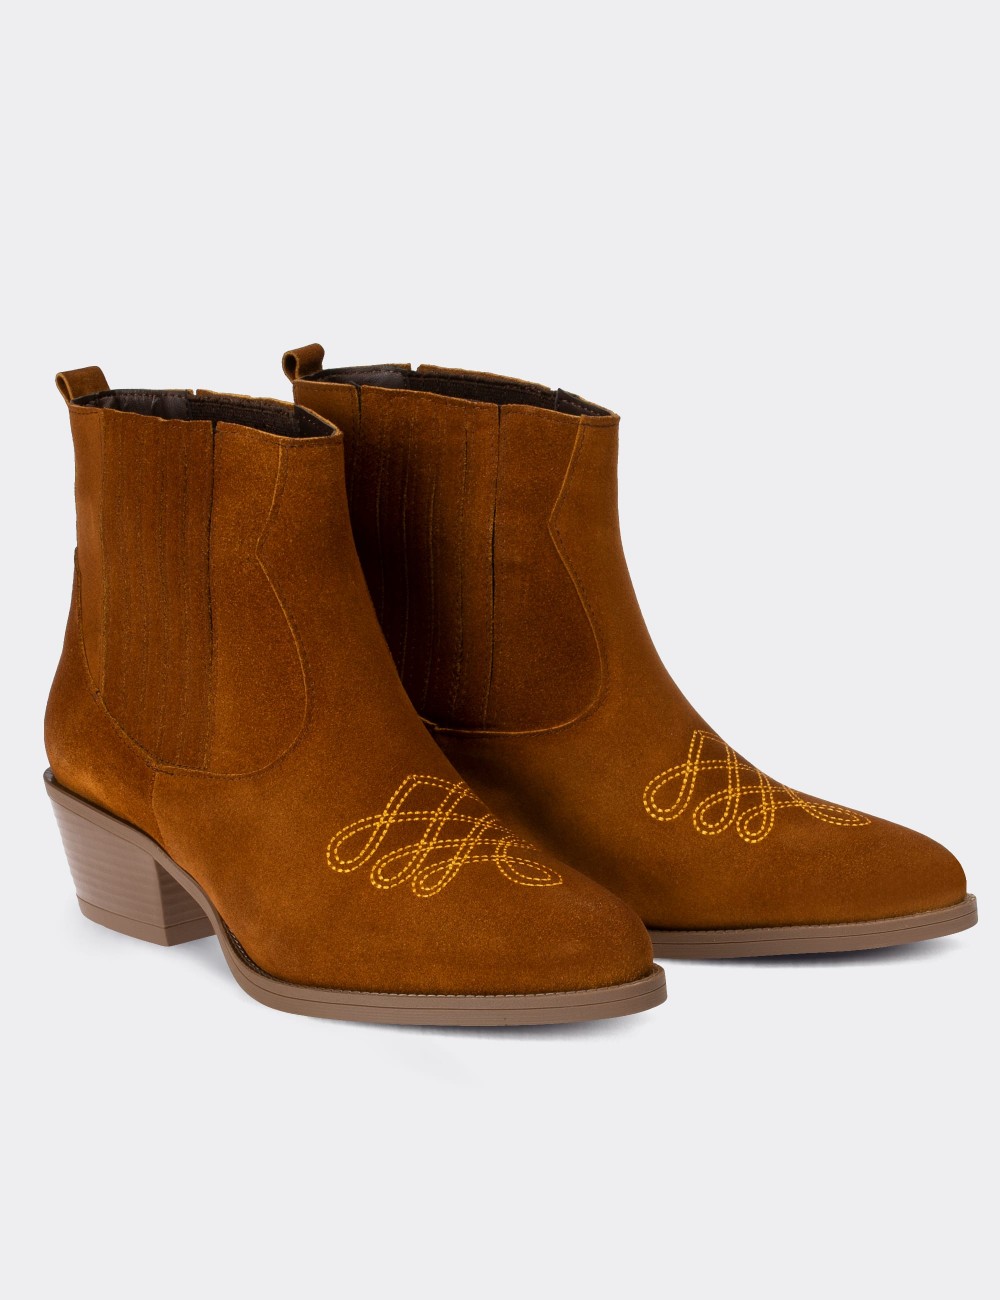 Tan Suede Leather Boots - E8100ZTBAC01